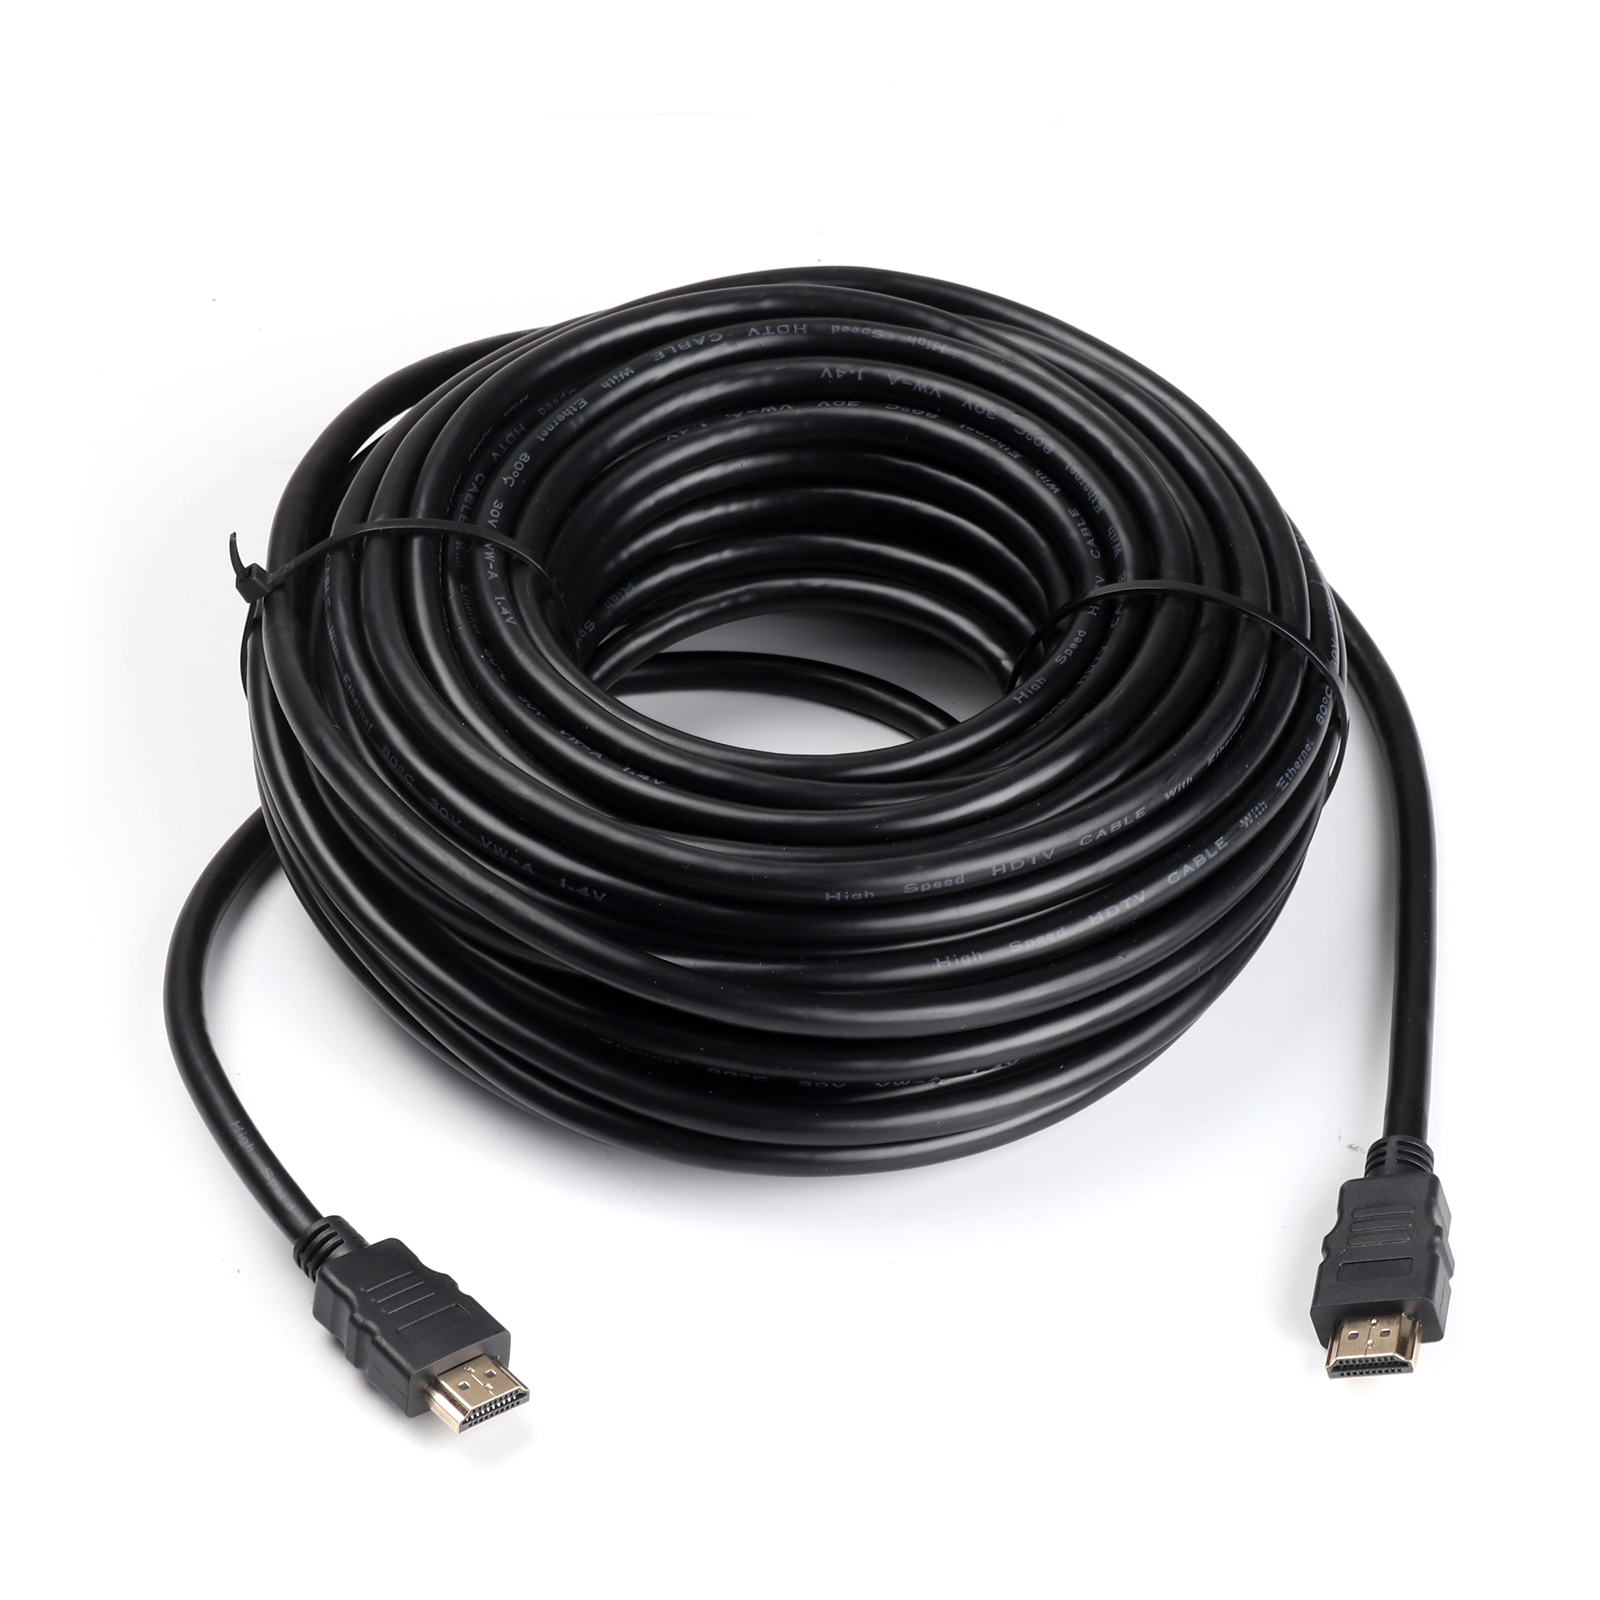 20M METRE HDMI CABLE V1.4 GOLD LEAD 3D HD DVD LED SENT TODAY ...